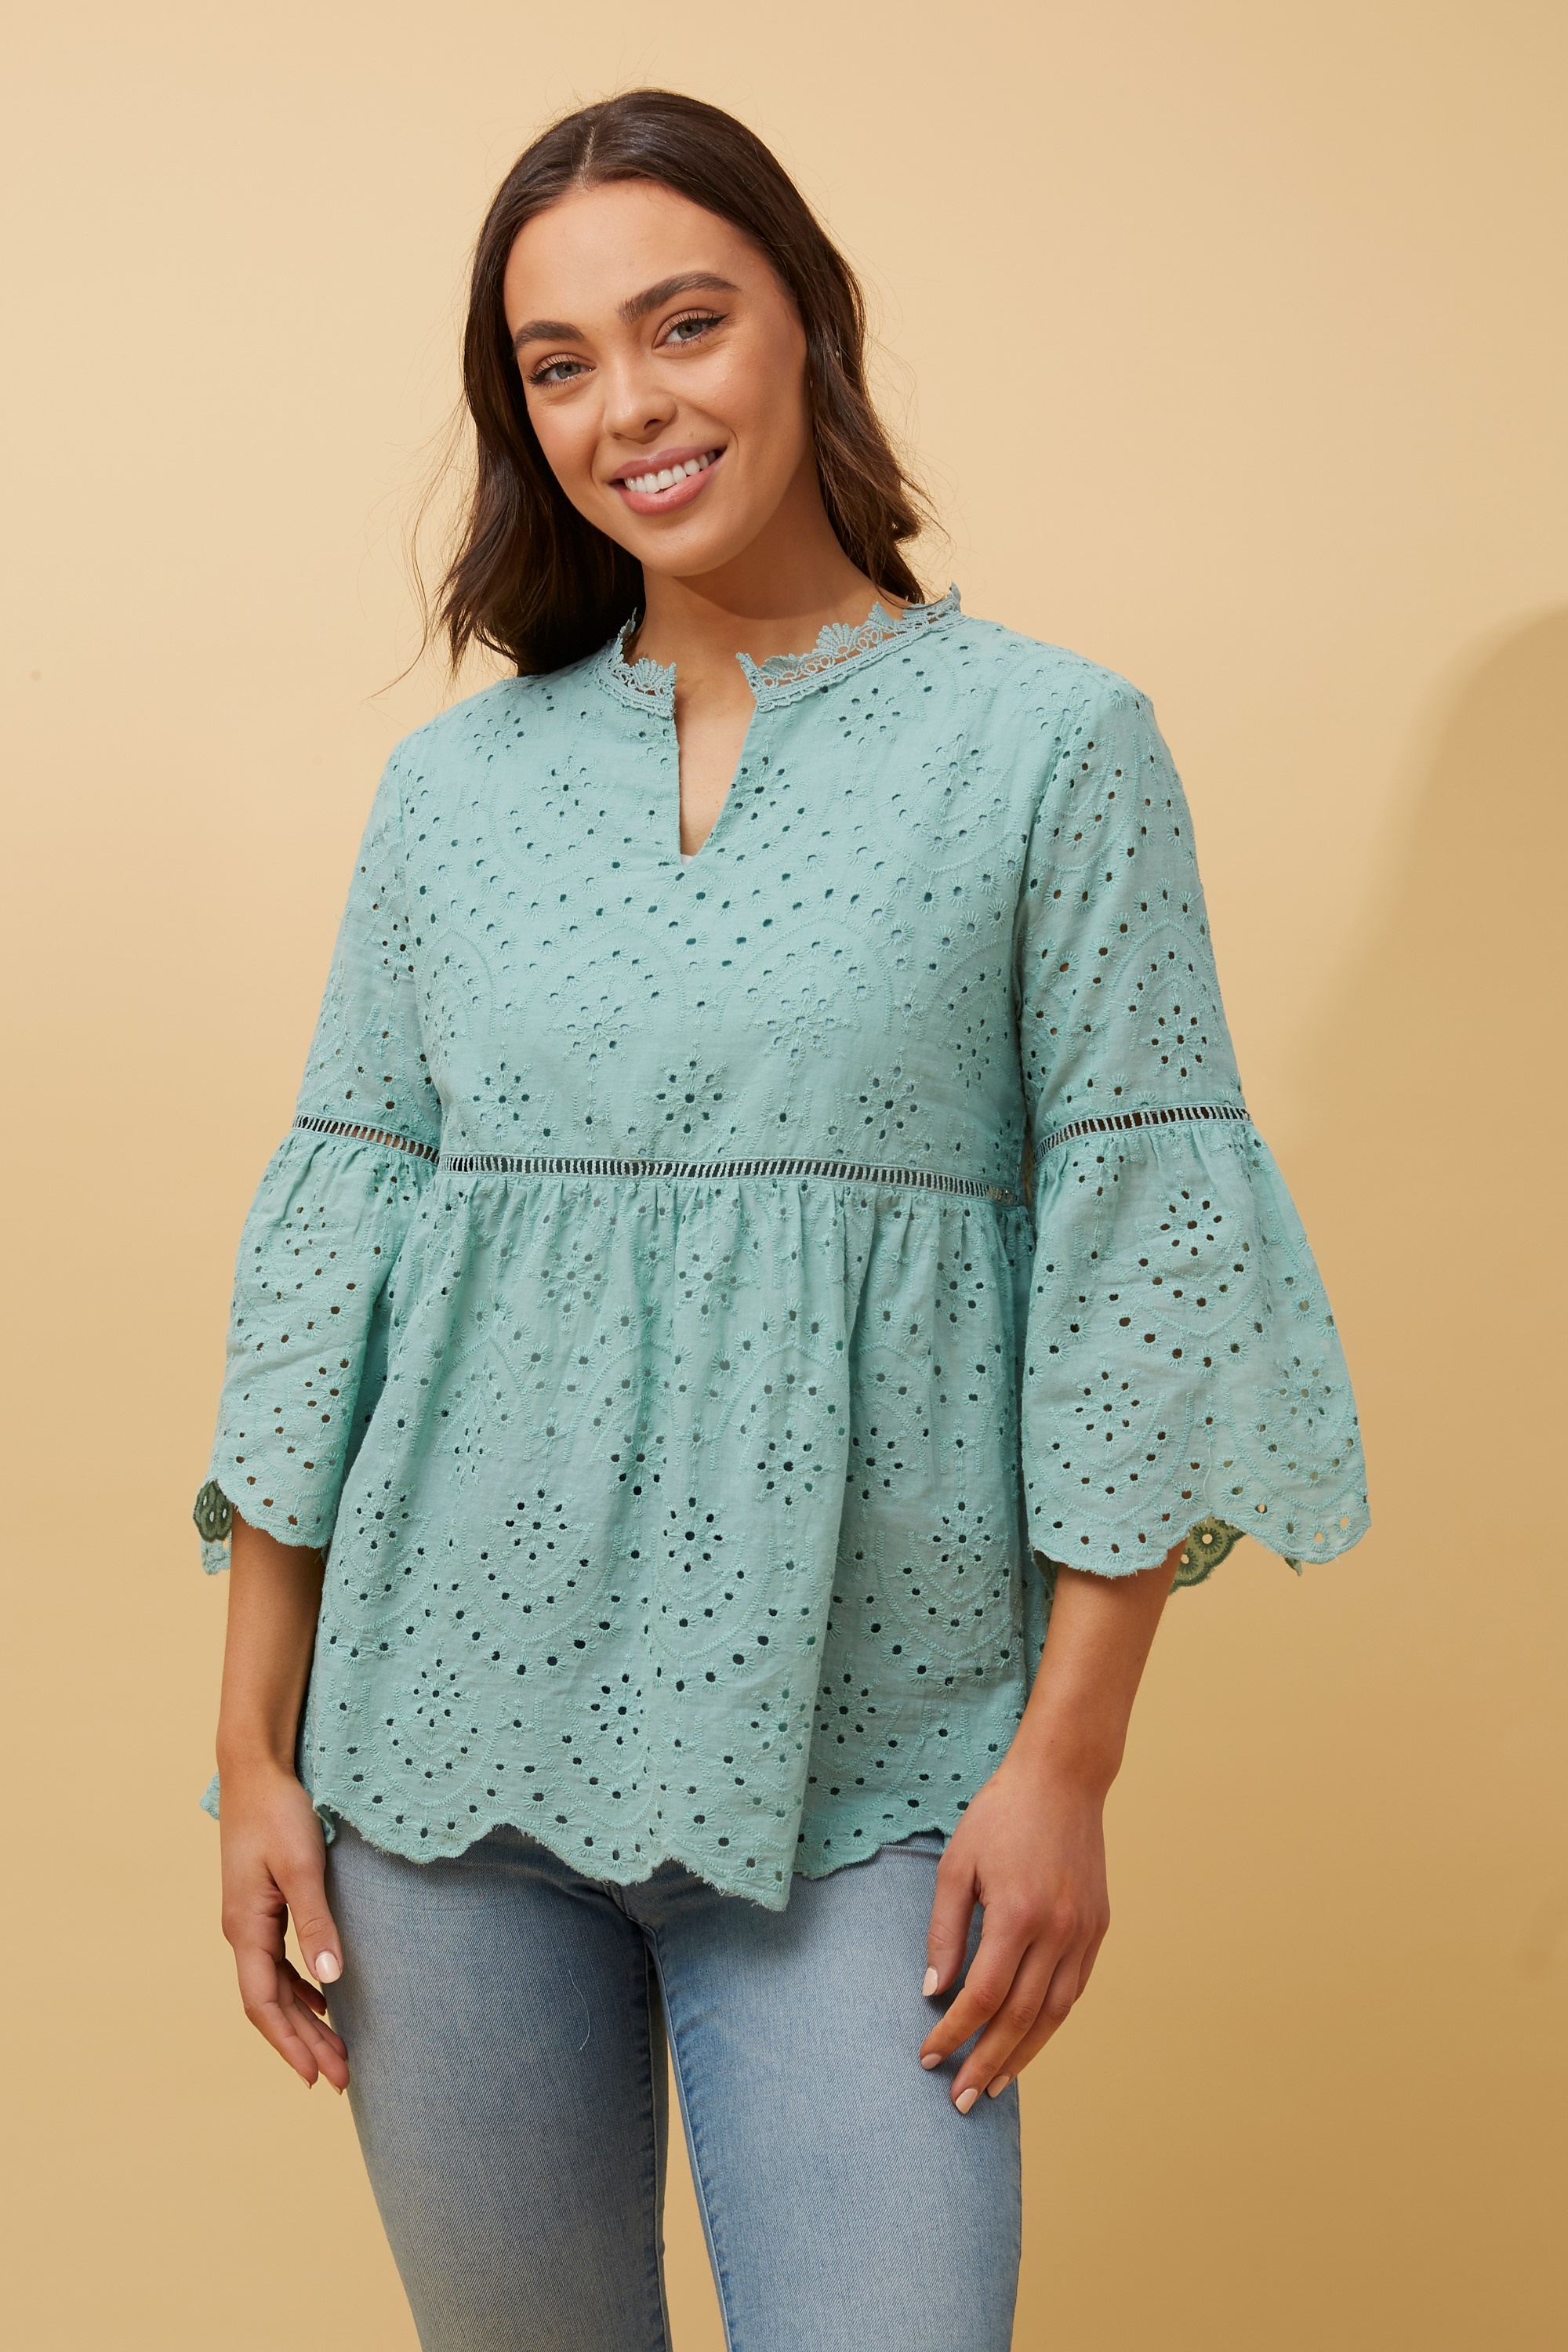 Broderie anglaise top | Buy Online Femme Connection